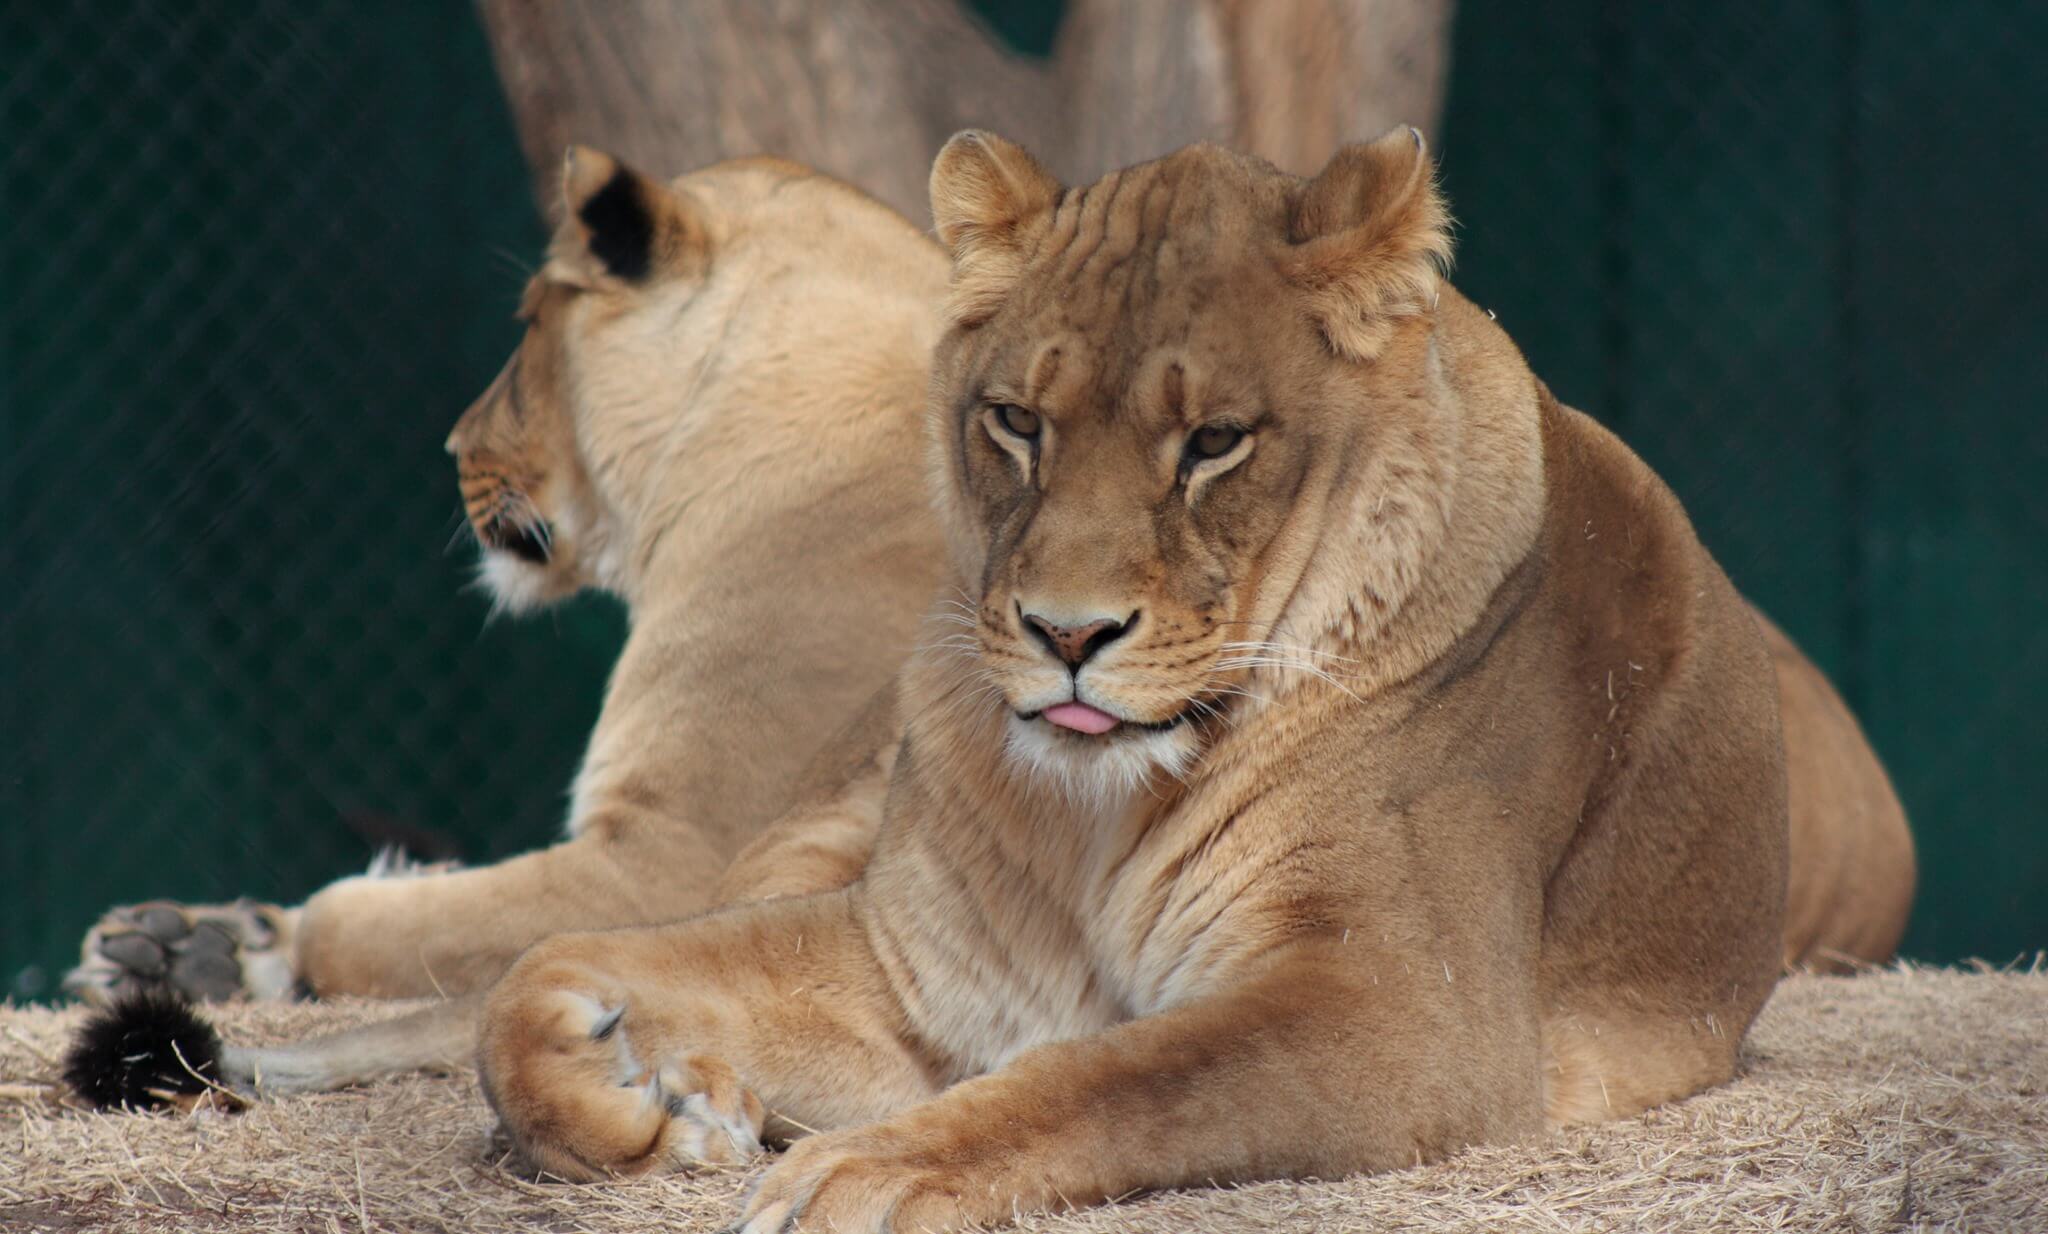 lionesses at the amarillo zoo